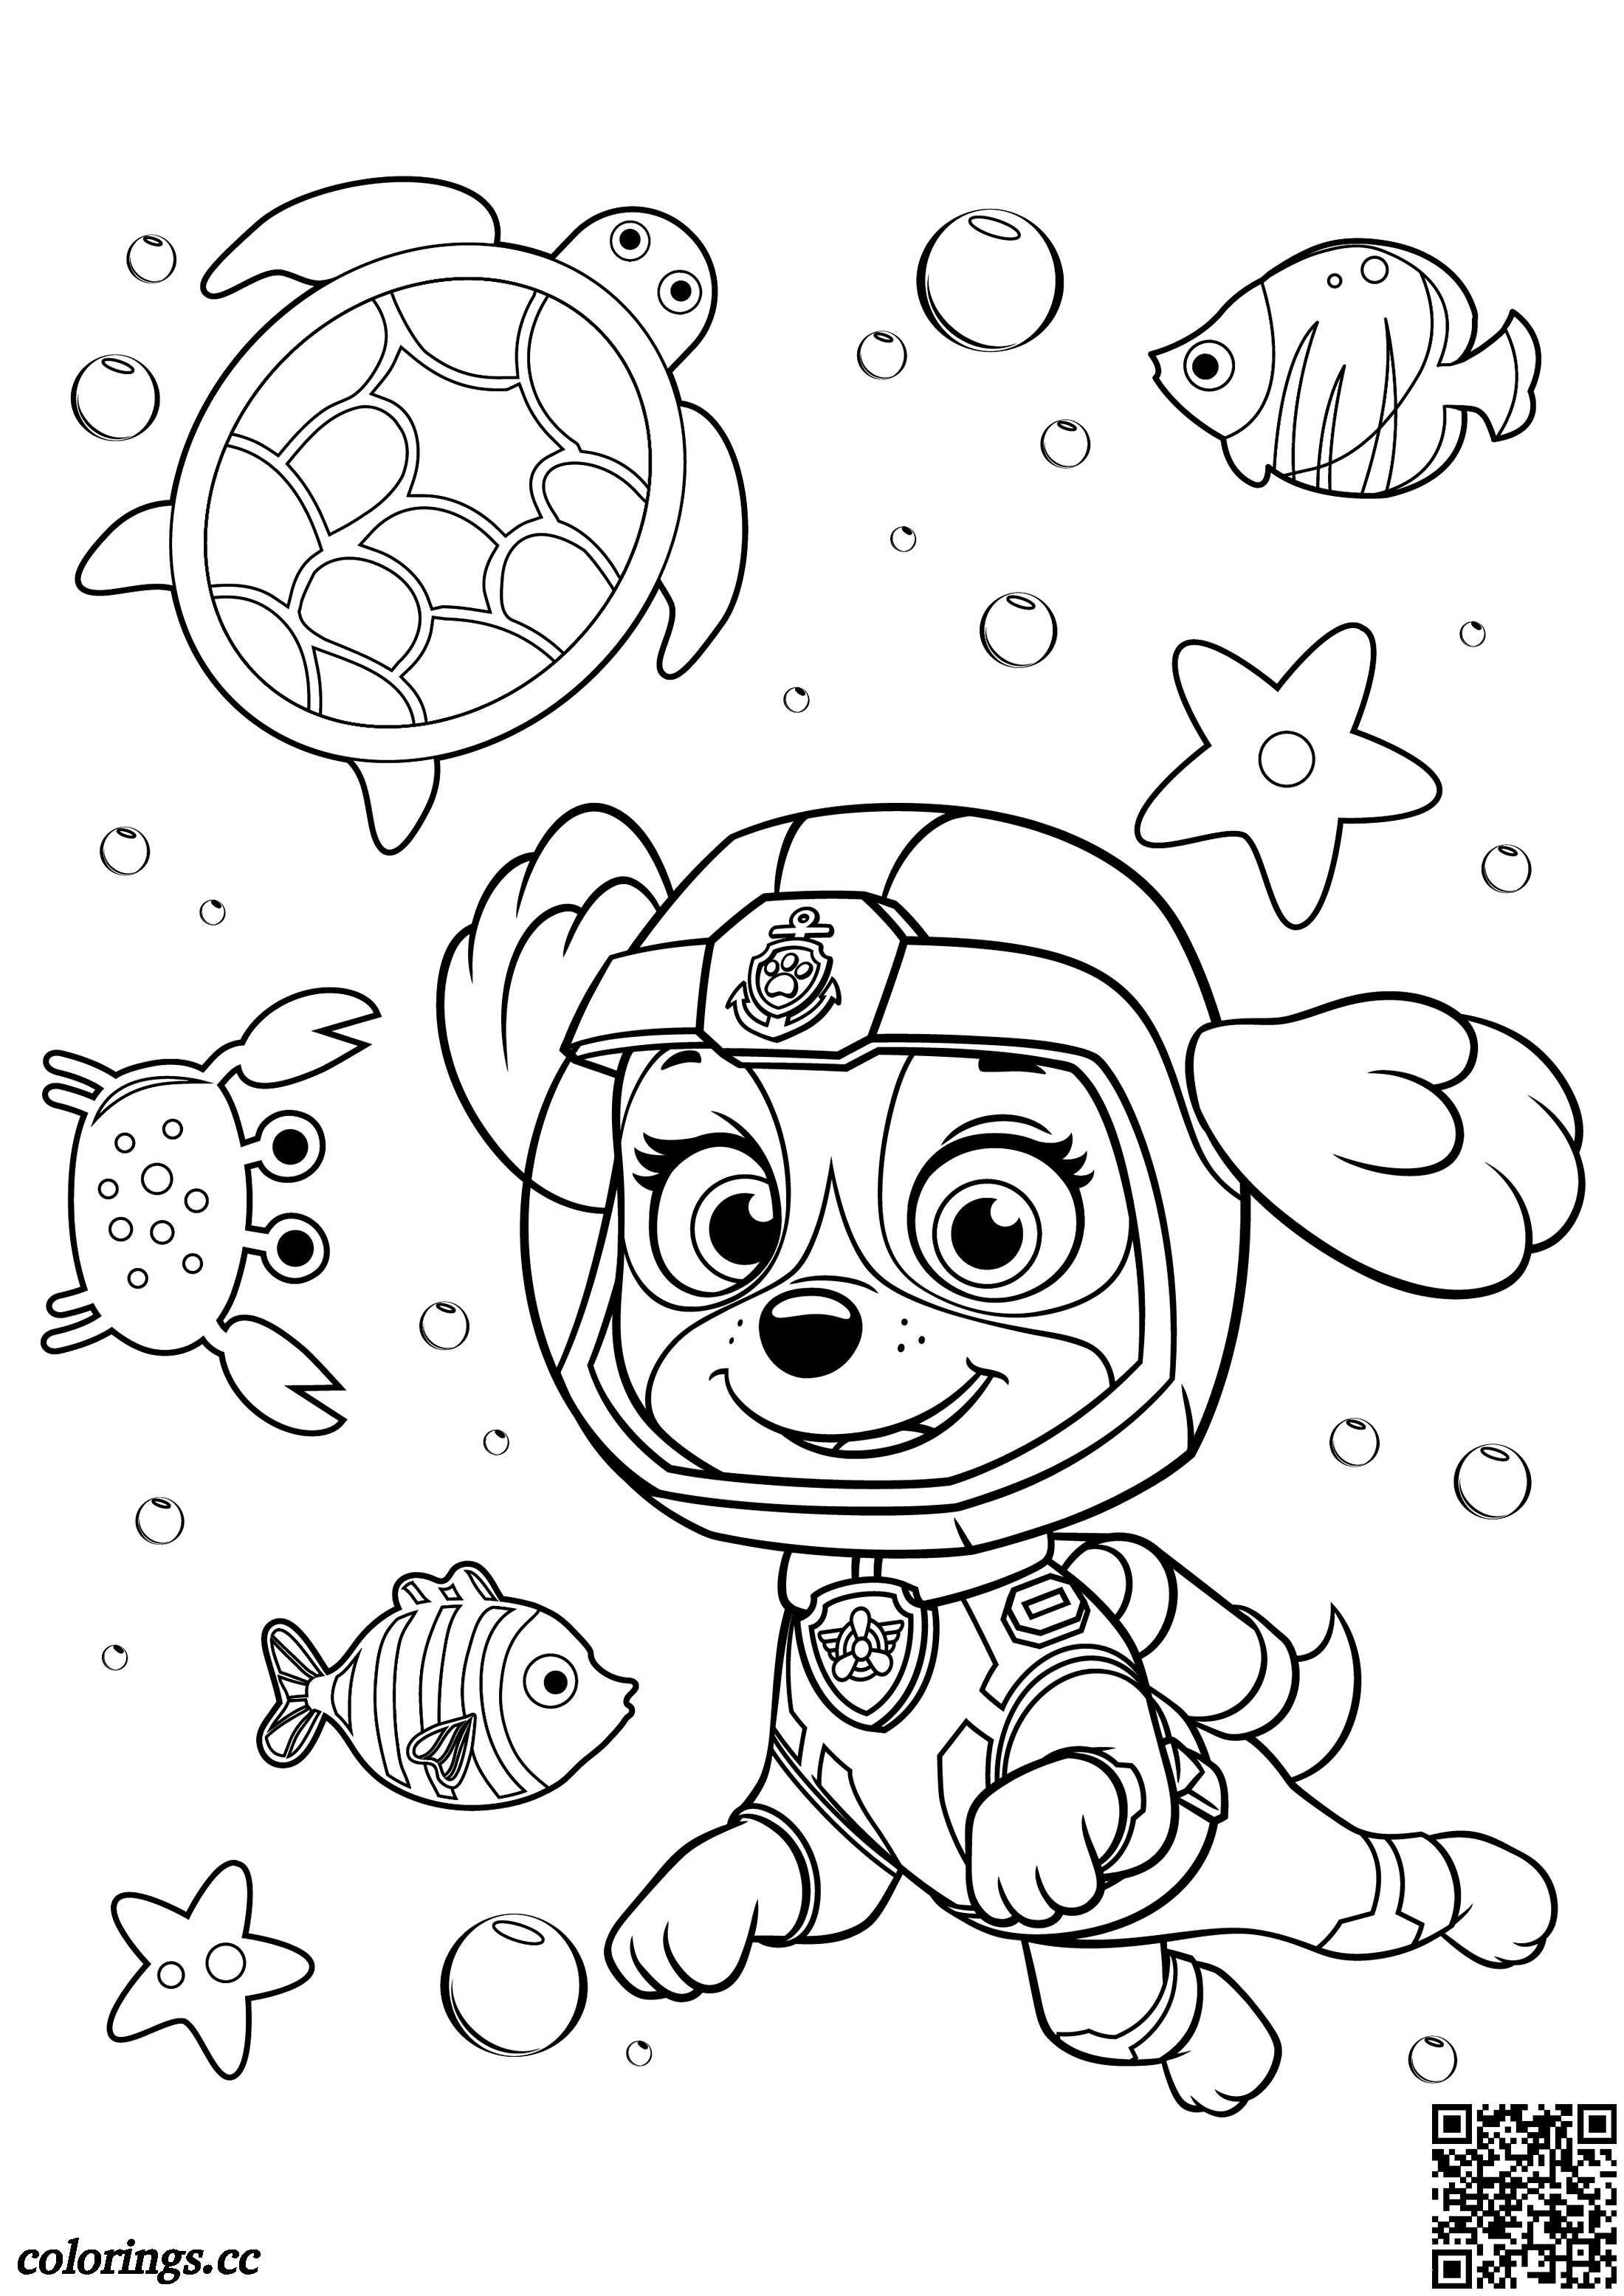 Skye   Sea Patrol coloring pages, Paw patrol coloring pages ...